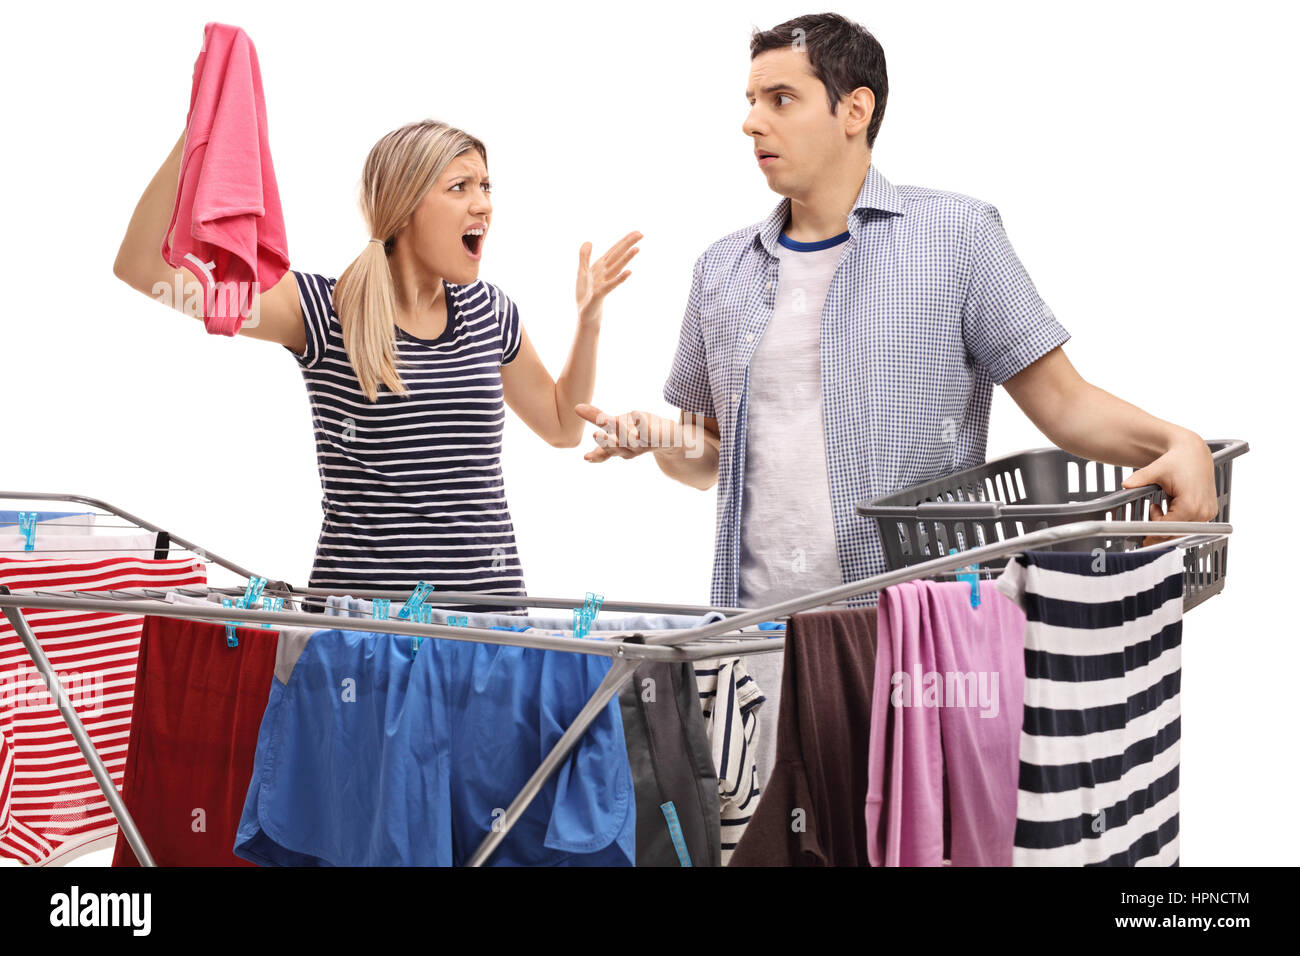 Young couple having an argument while hanging clothes on a clothing rack dryer isolated on white background Stock Photo